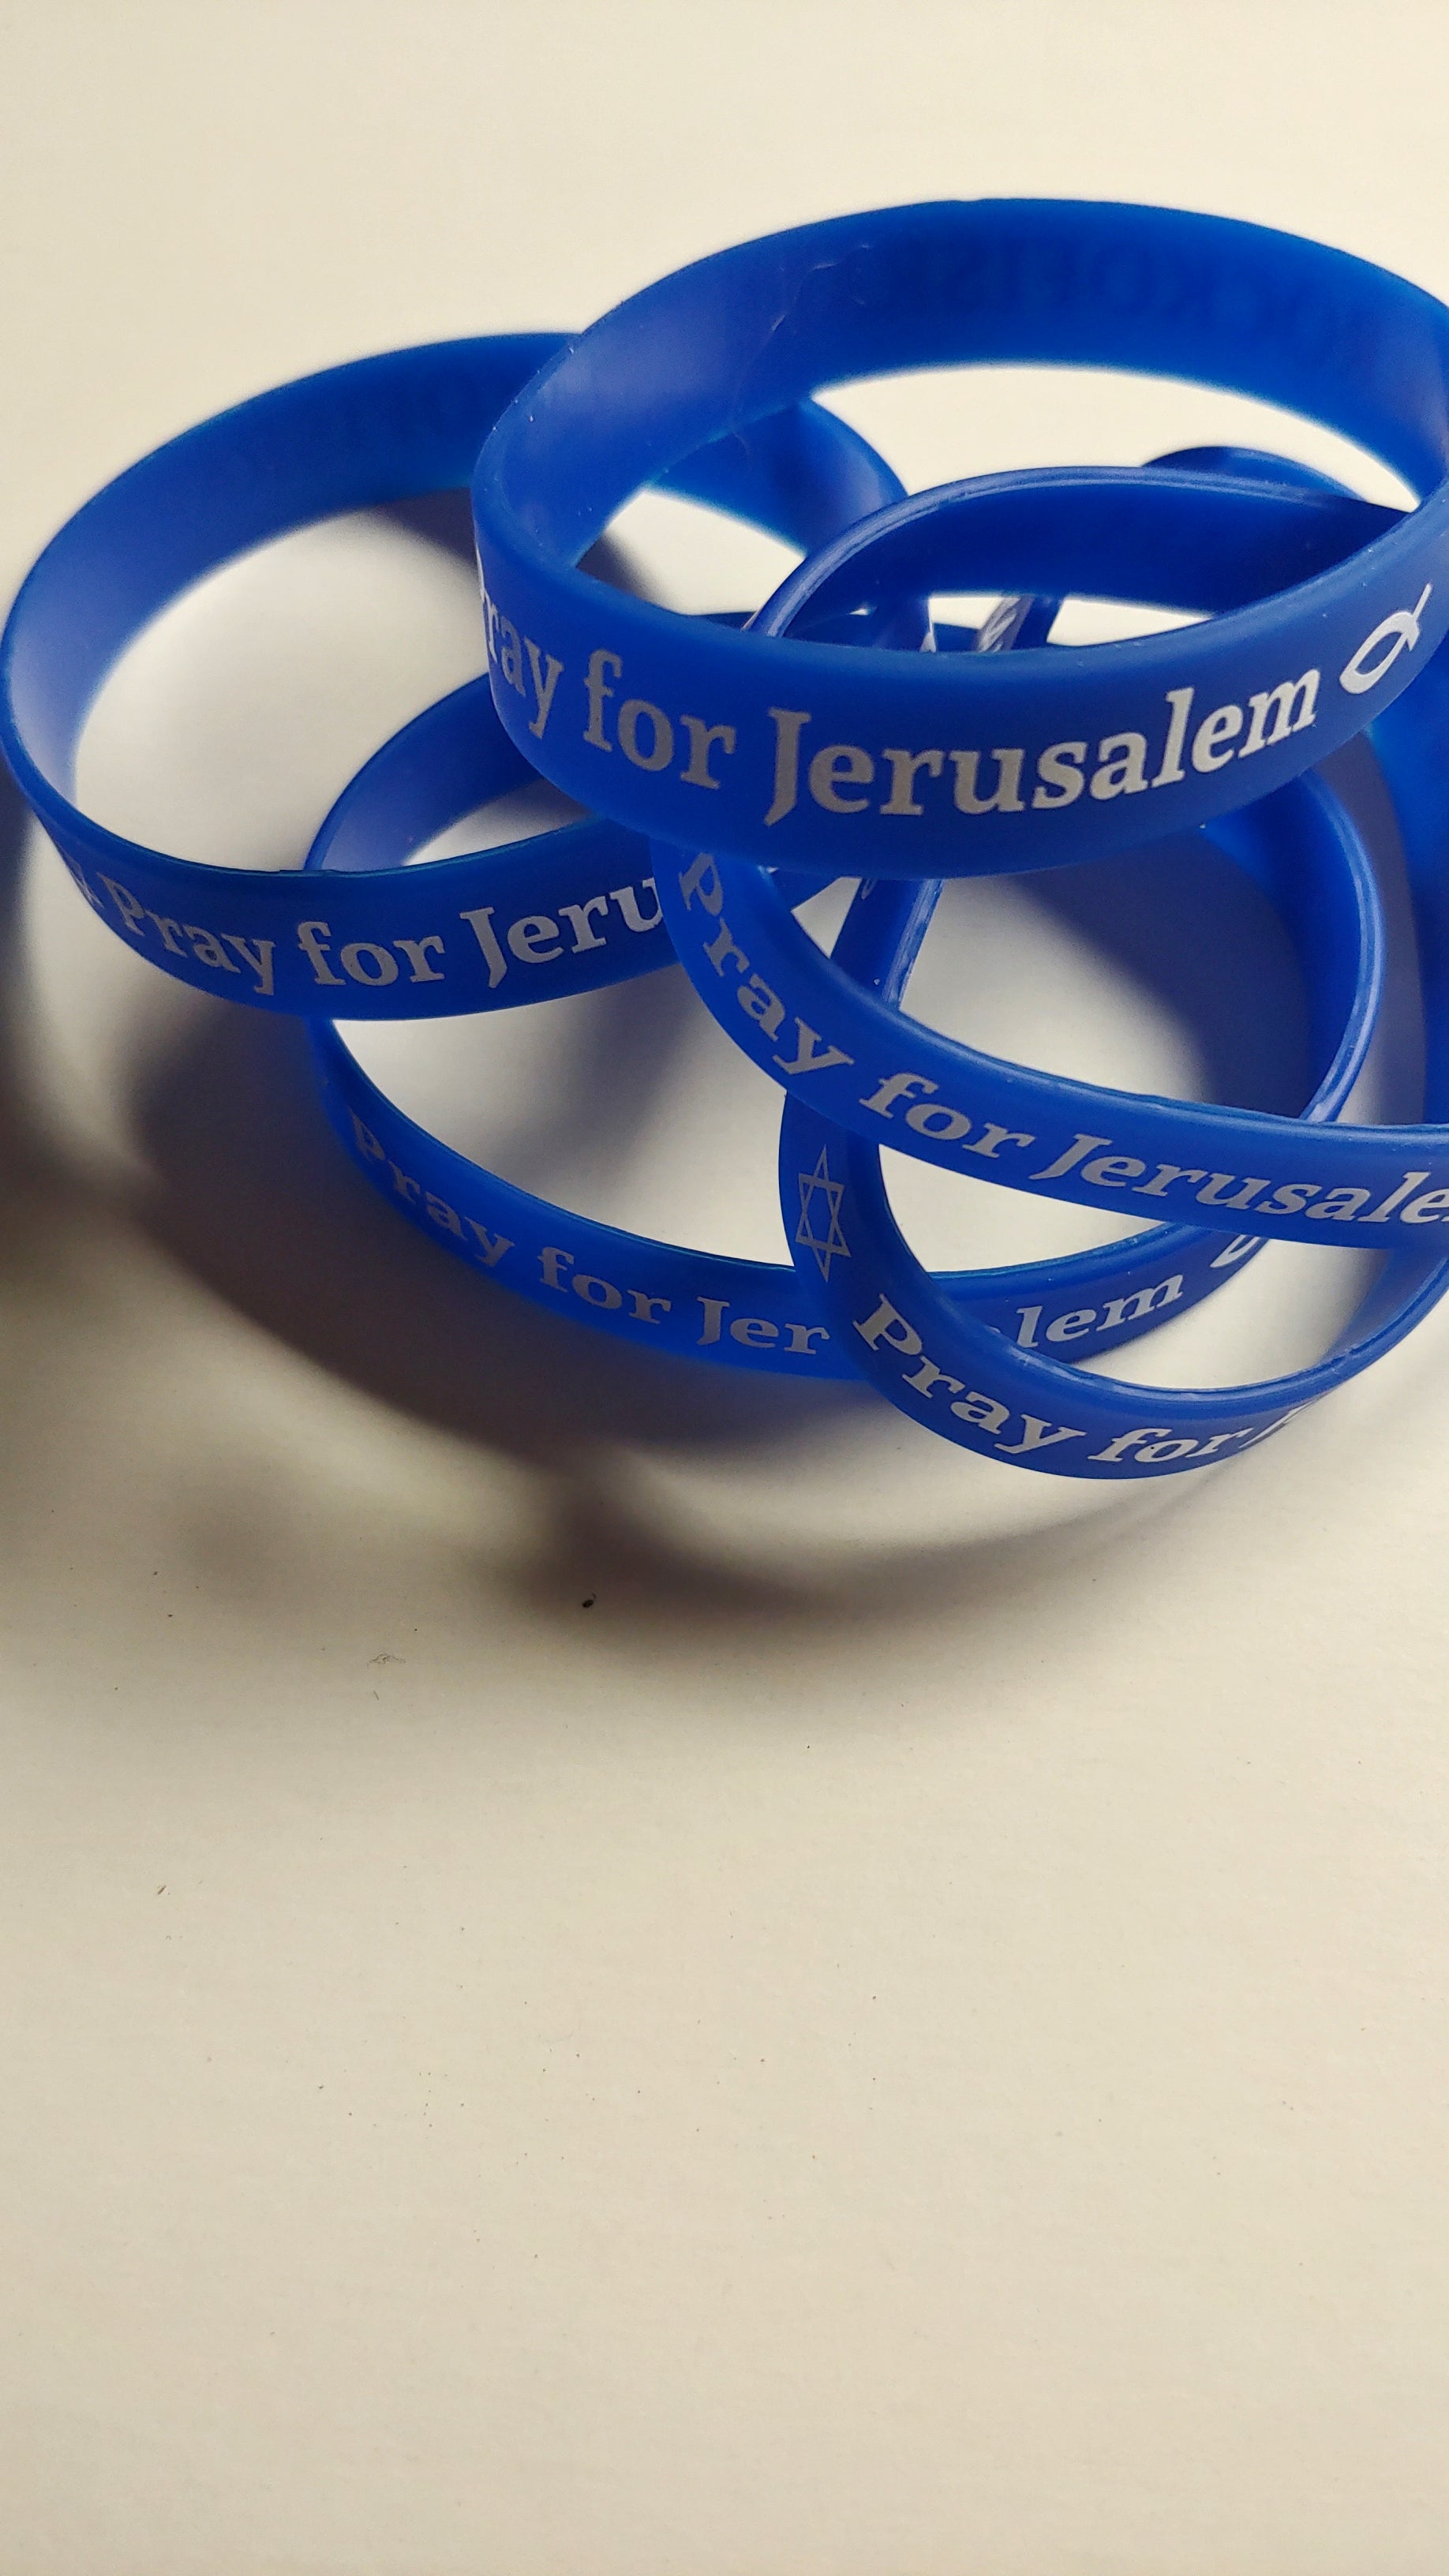 Pray for Rock wristband Pray / Store Jerusalem Israel Israel for – rubber of